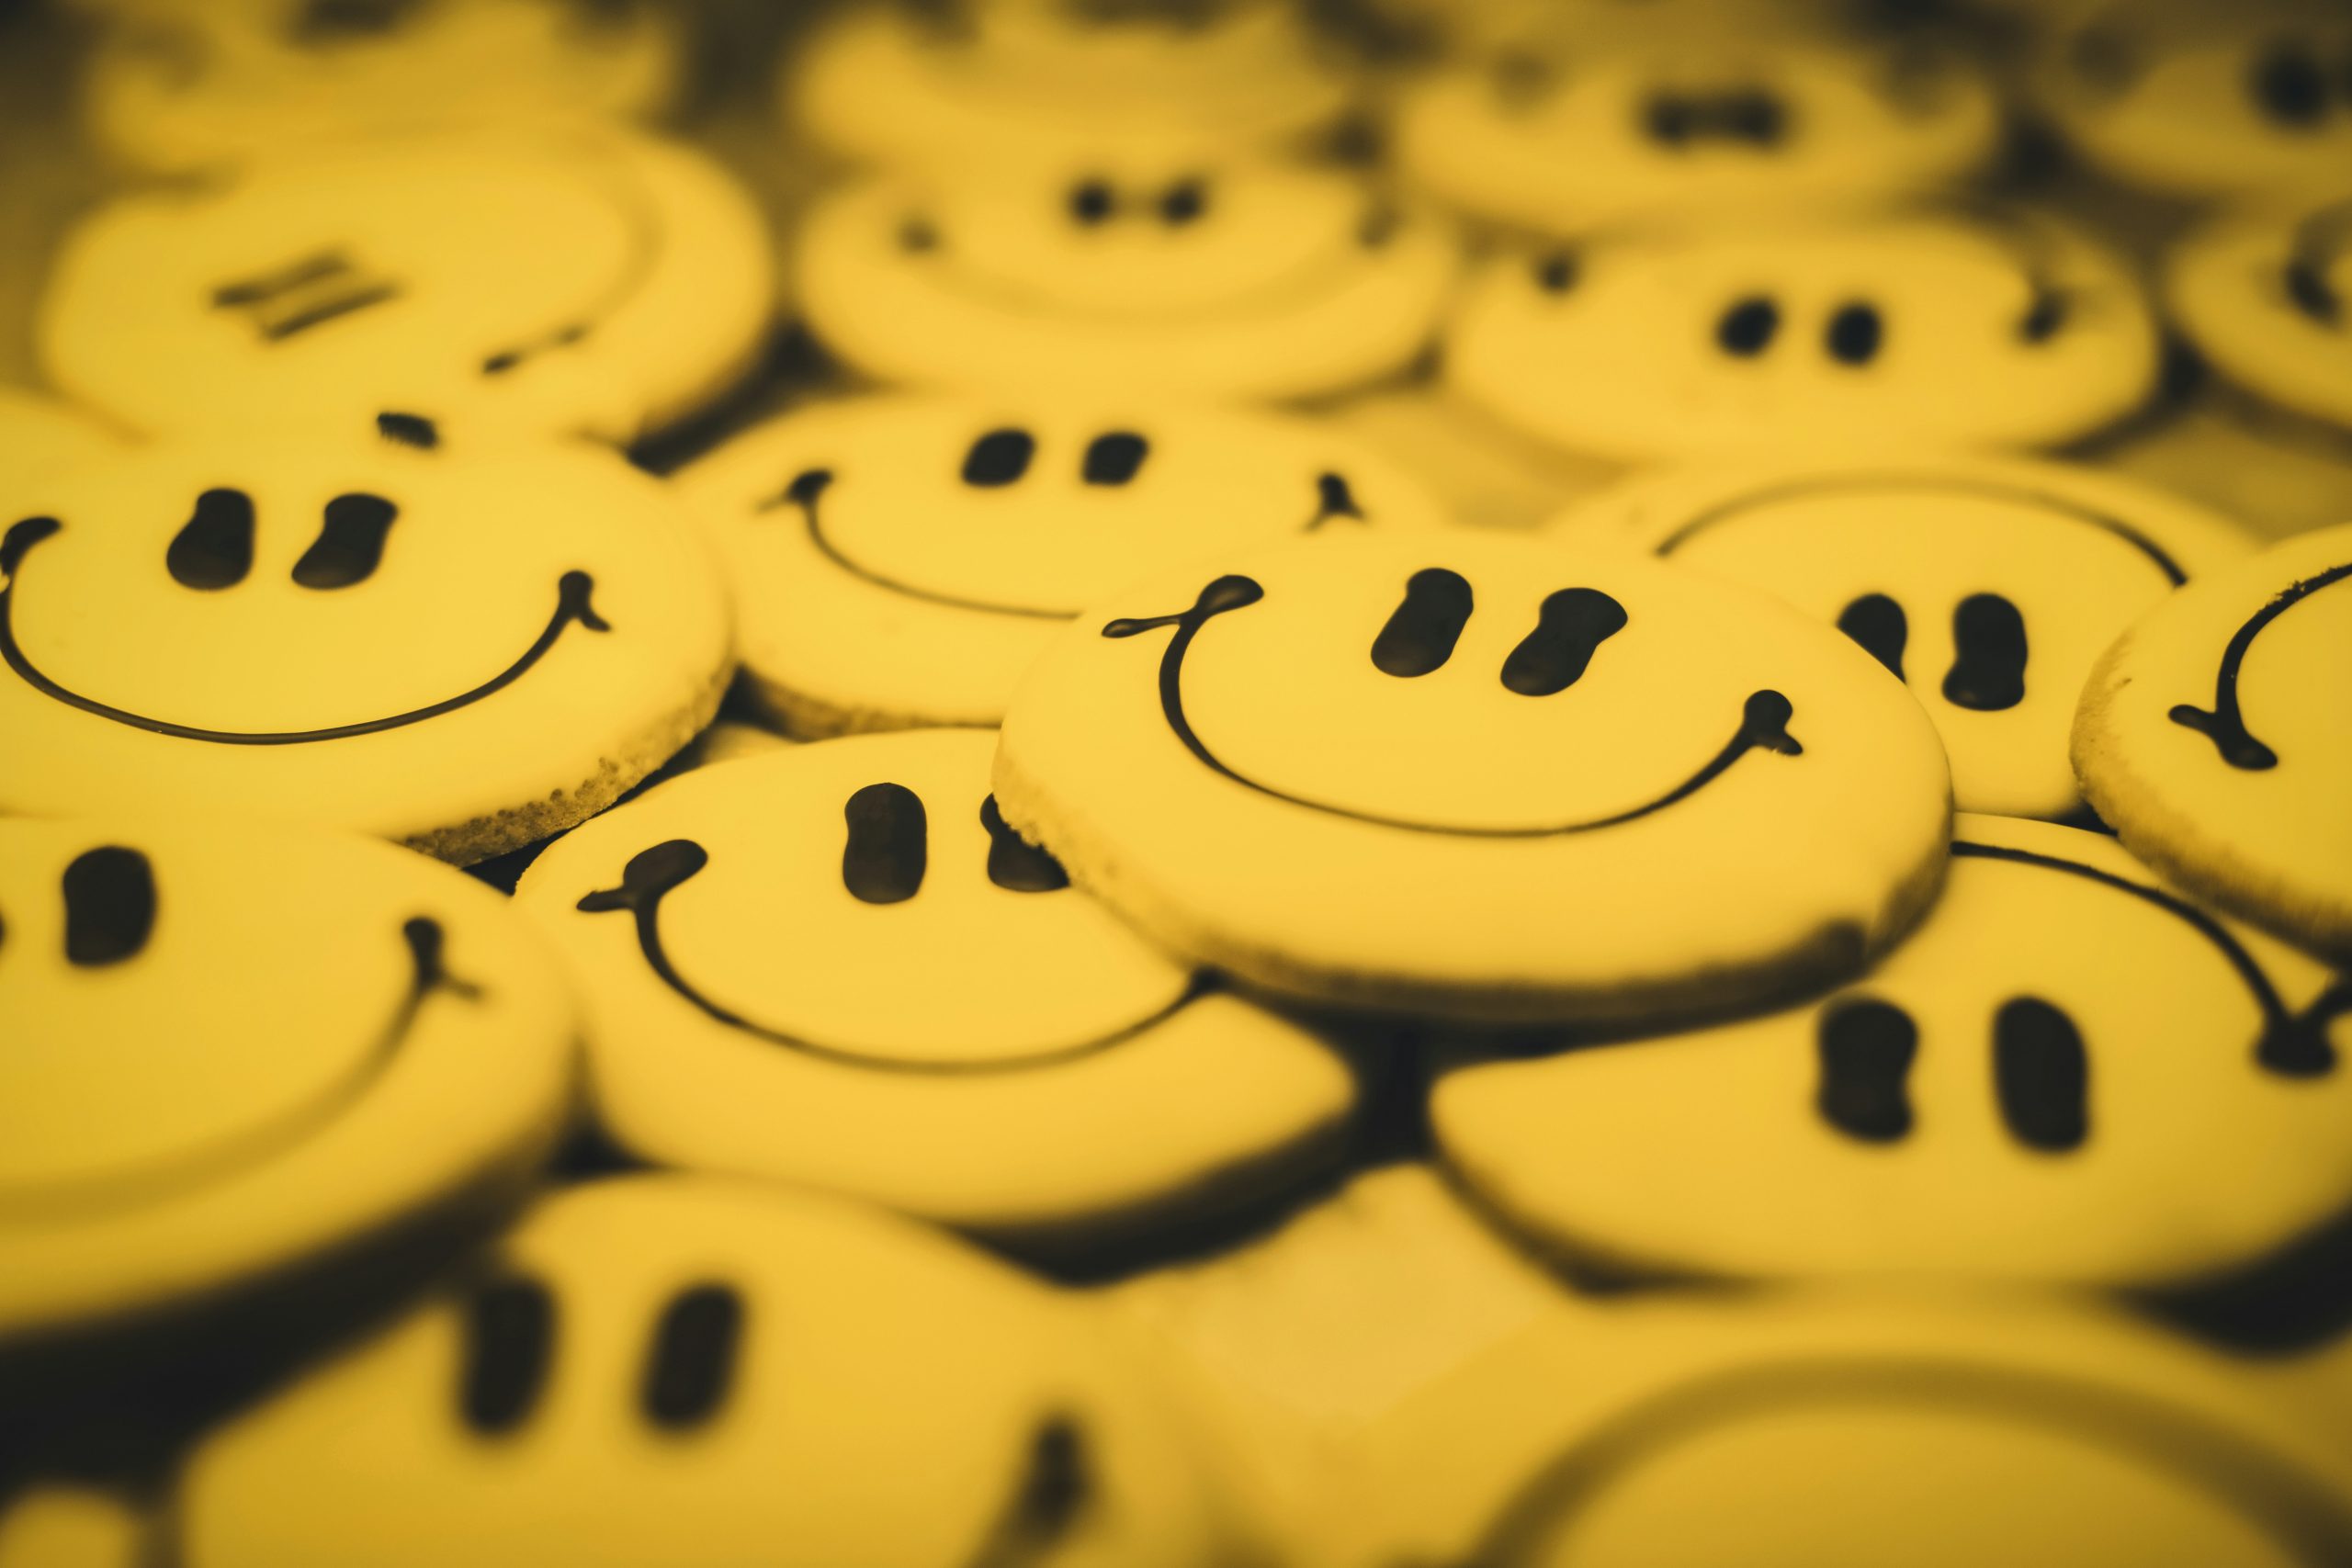 Smiley yellow face cookies! Image by Tim Mossholder via Unsplash. Thanks Tim.